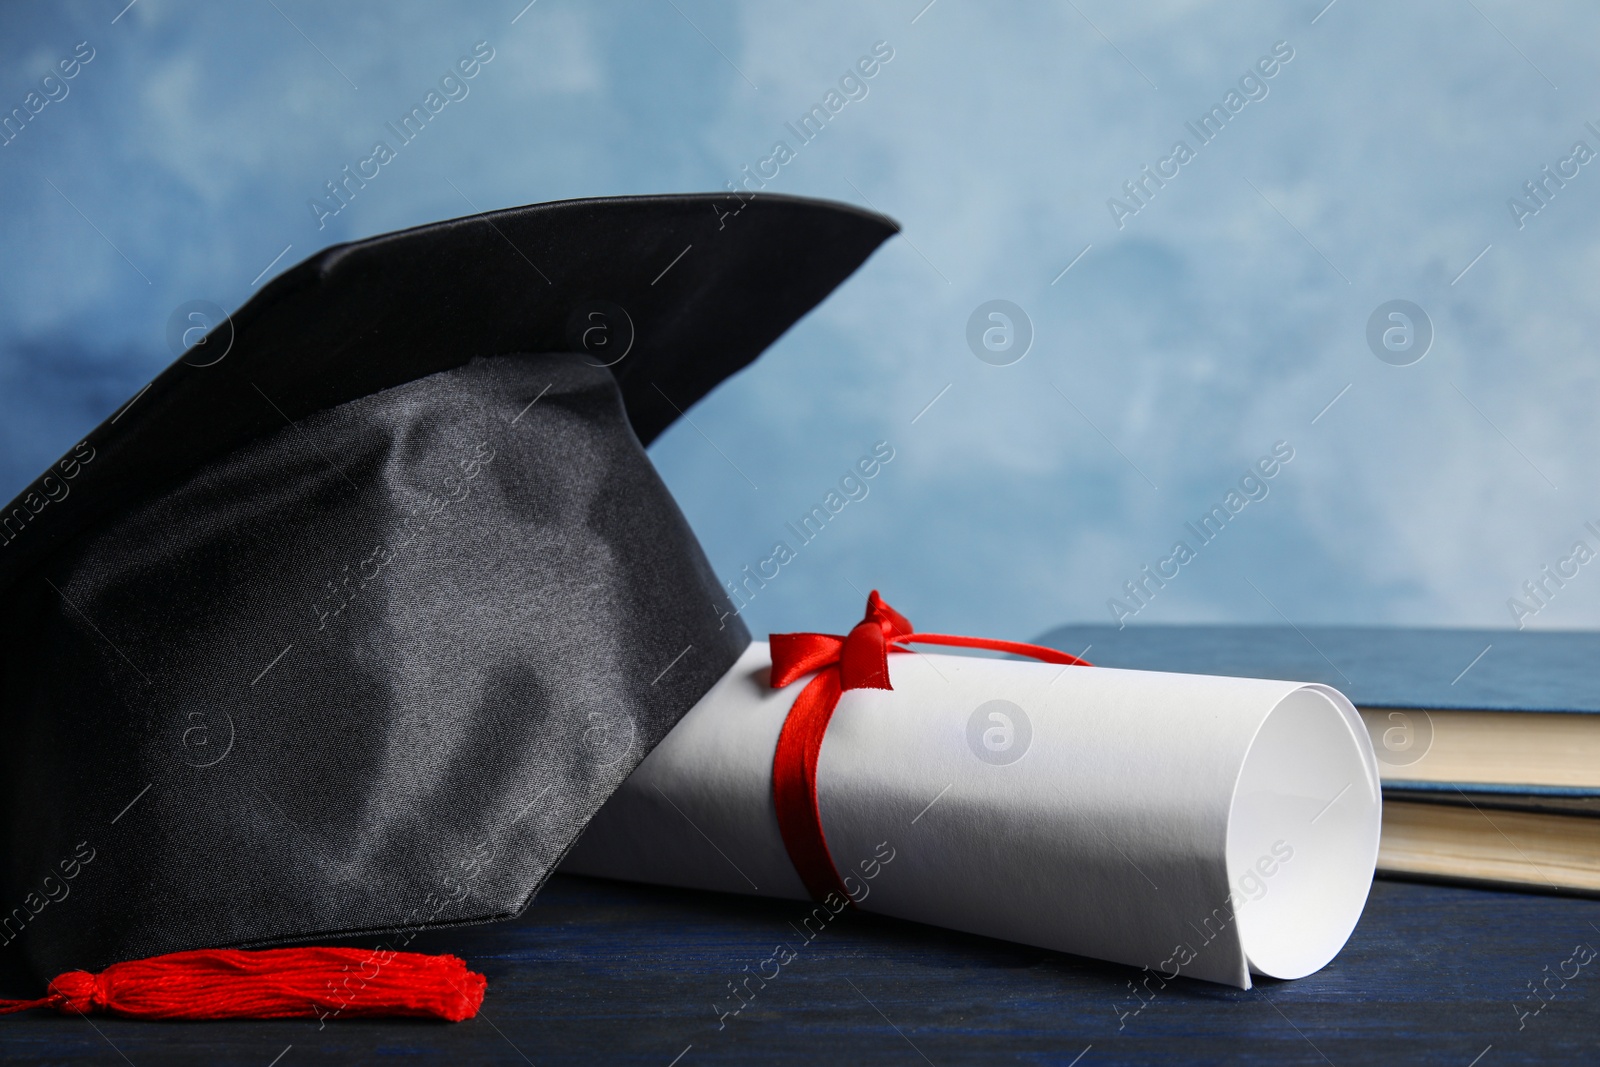 Photo of Graduation hat, books and student's diploma on dark blue wooden table against light blue background